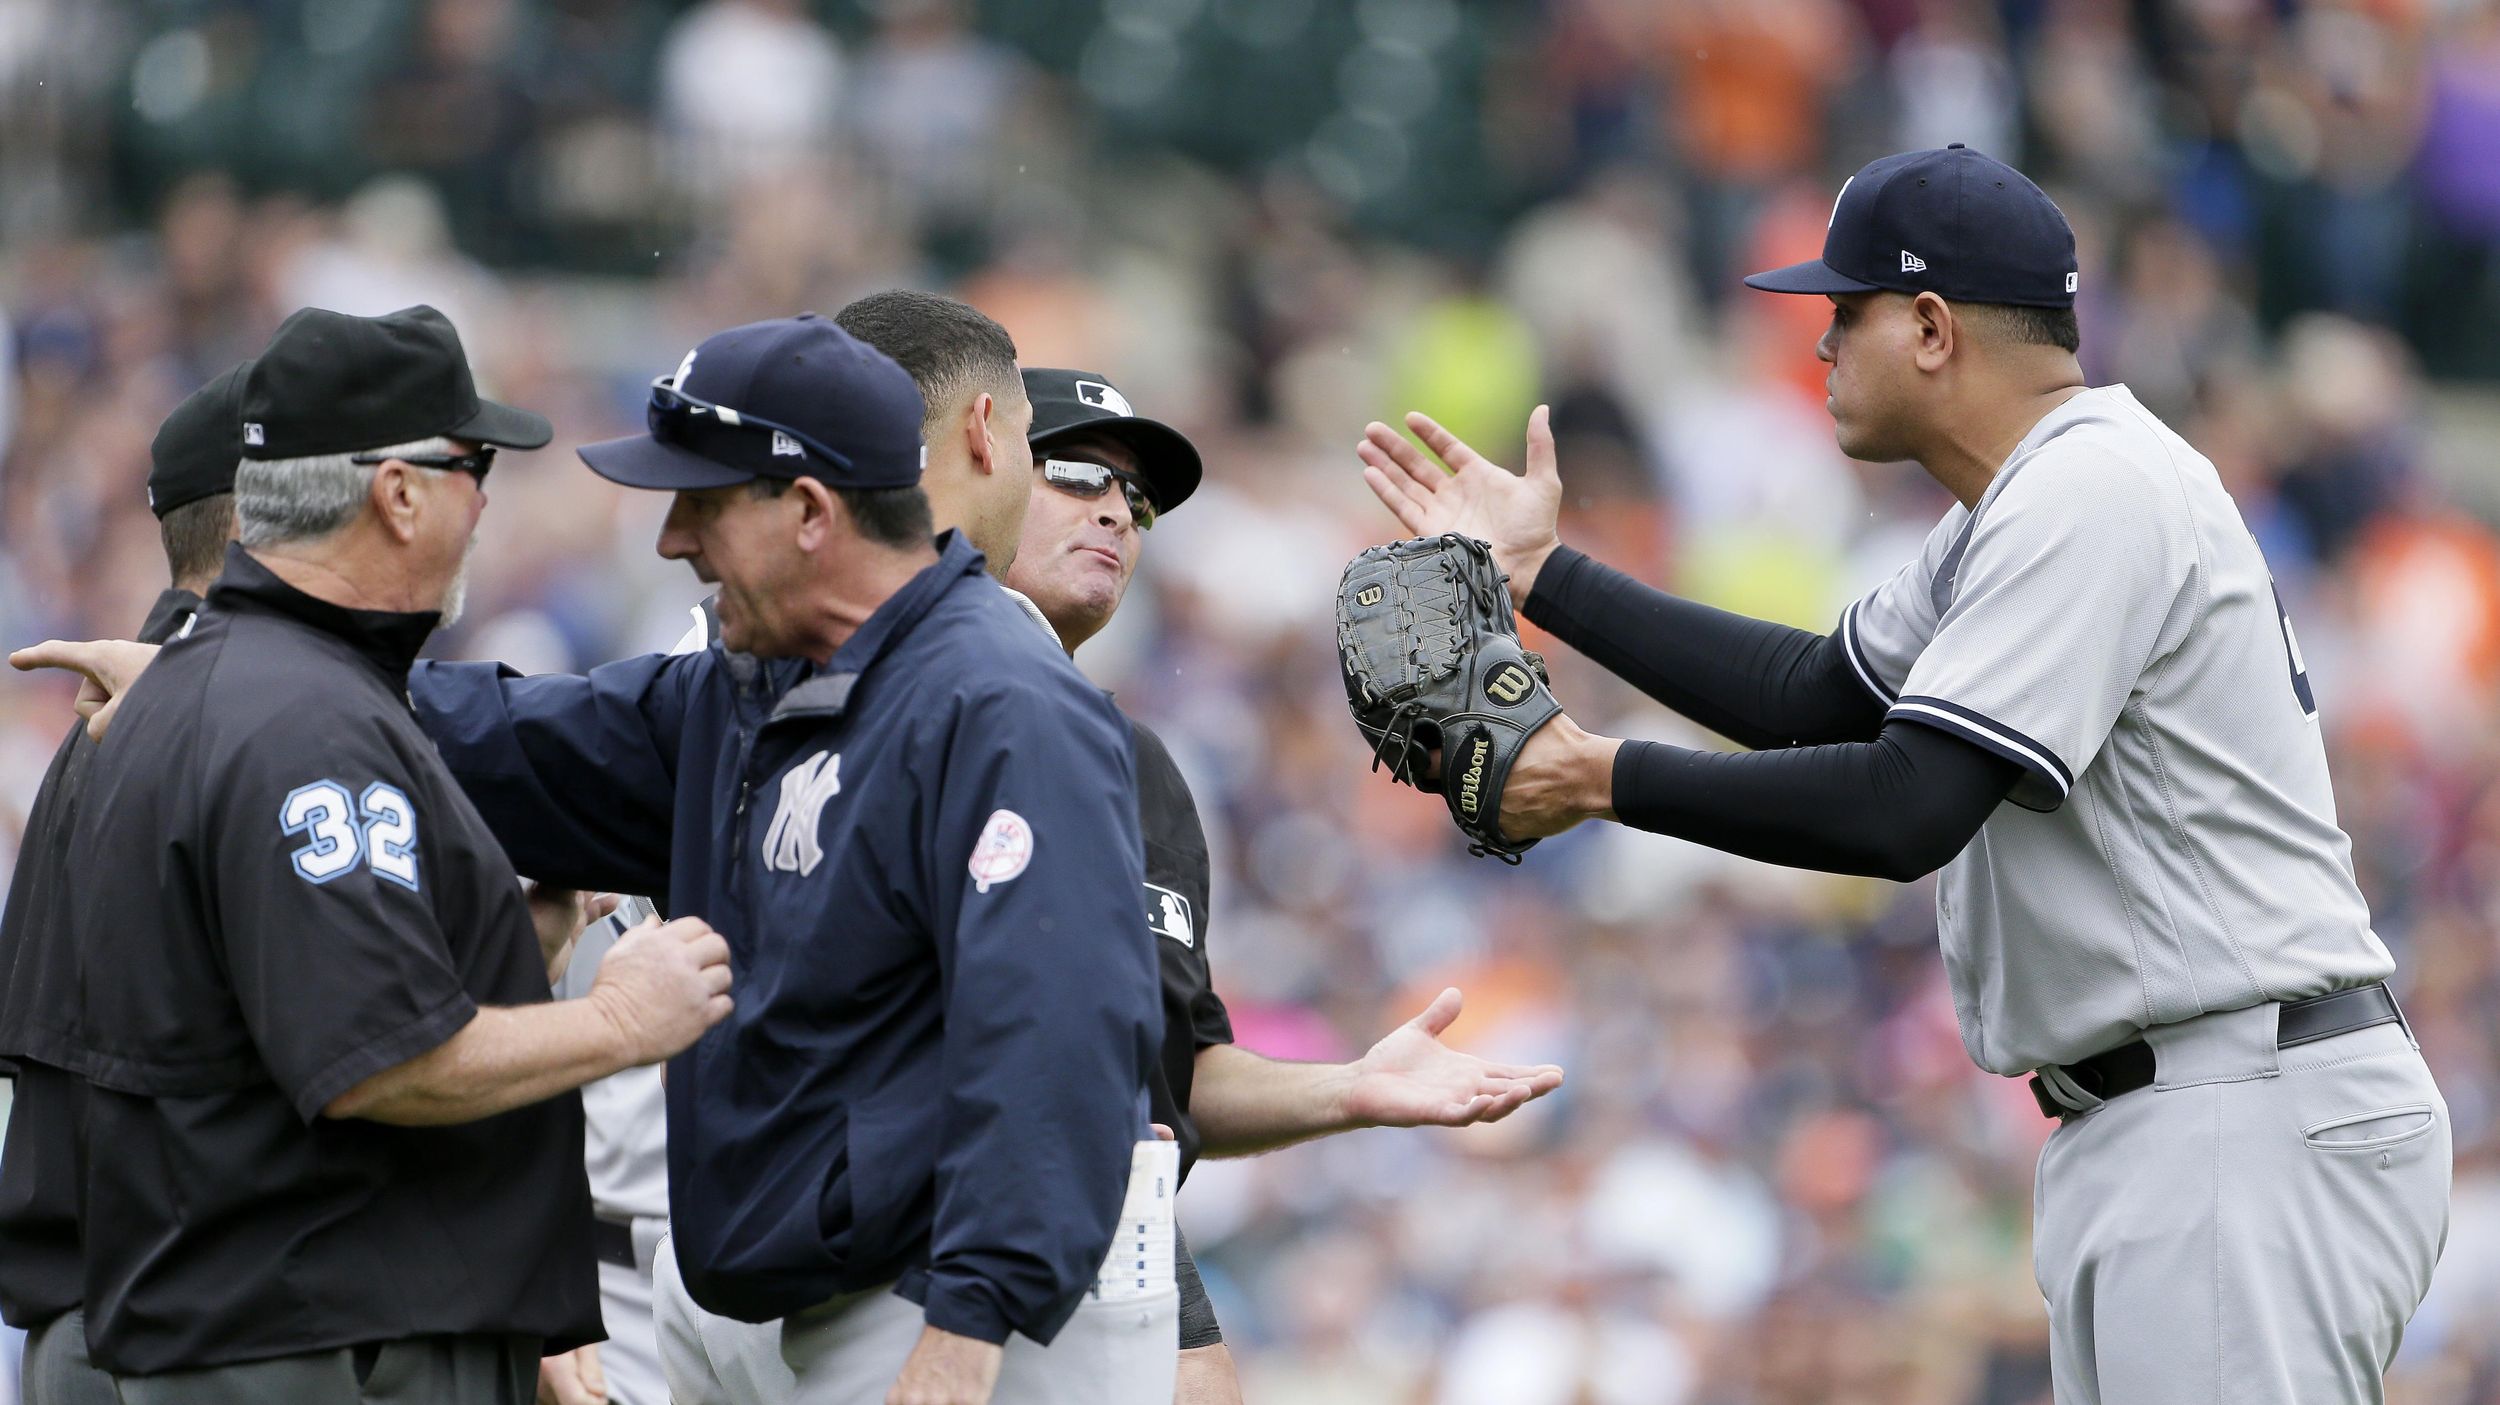 Mlb Baseball Tigers Prevail After Brawl With Yankees The Spokesman Review - rodney cobb brawl stars